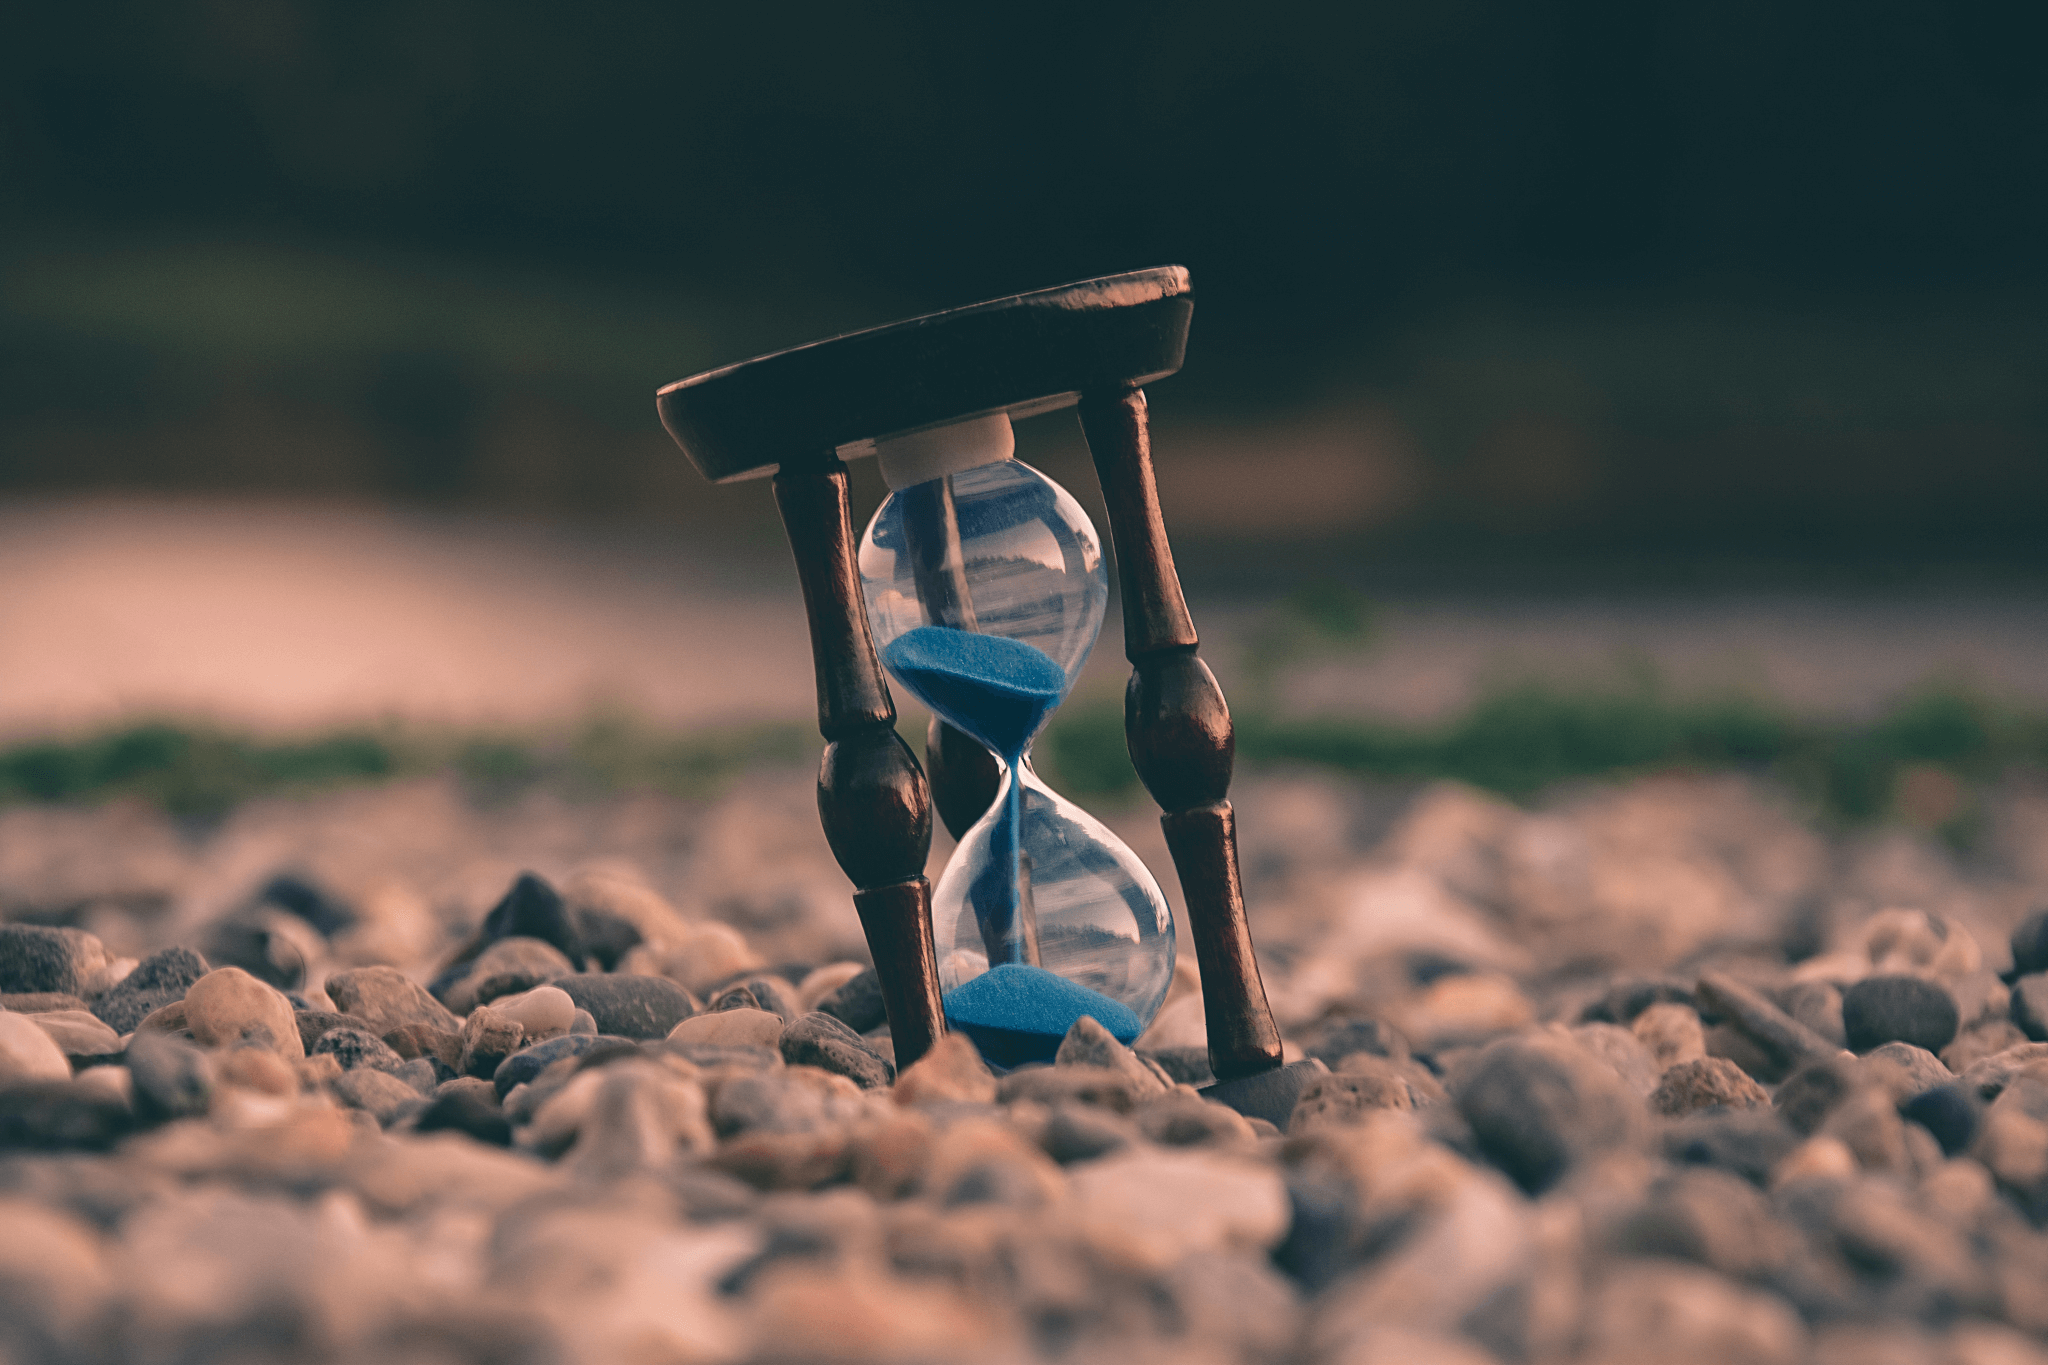 Working with time